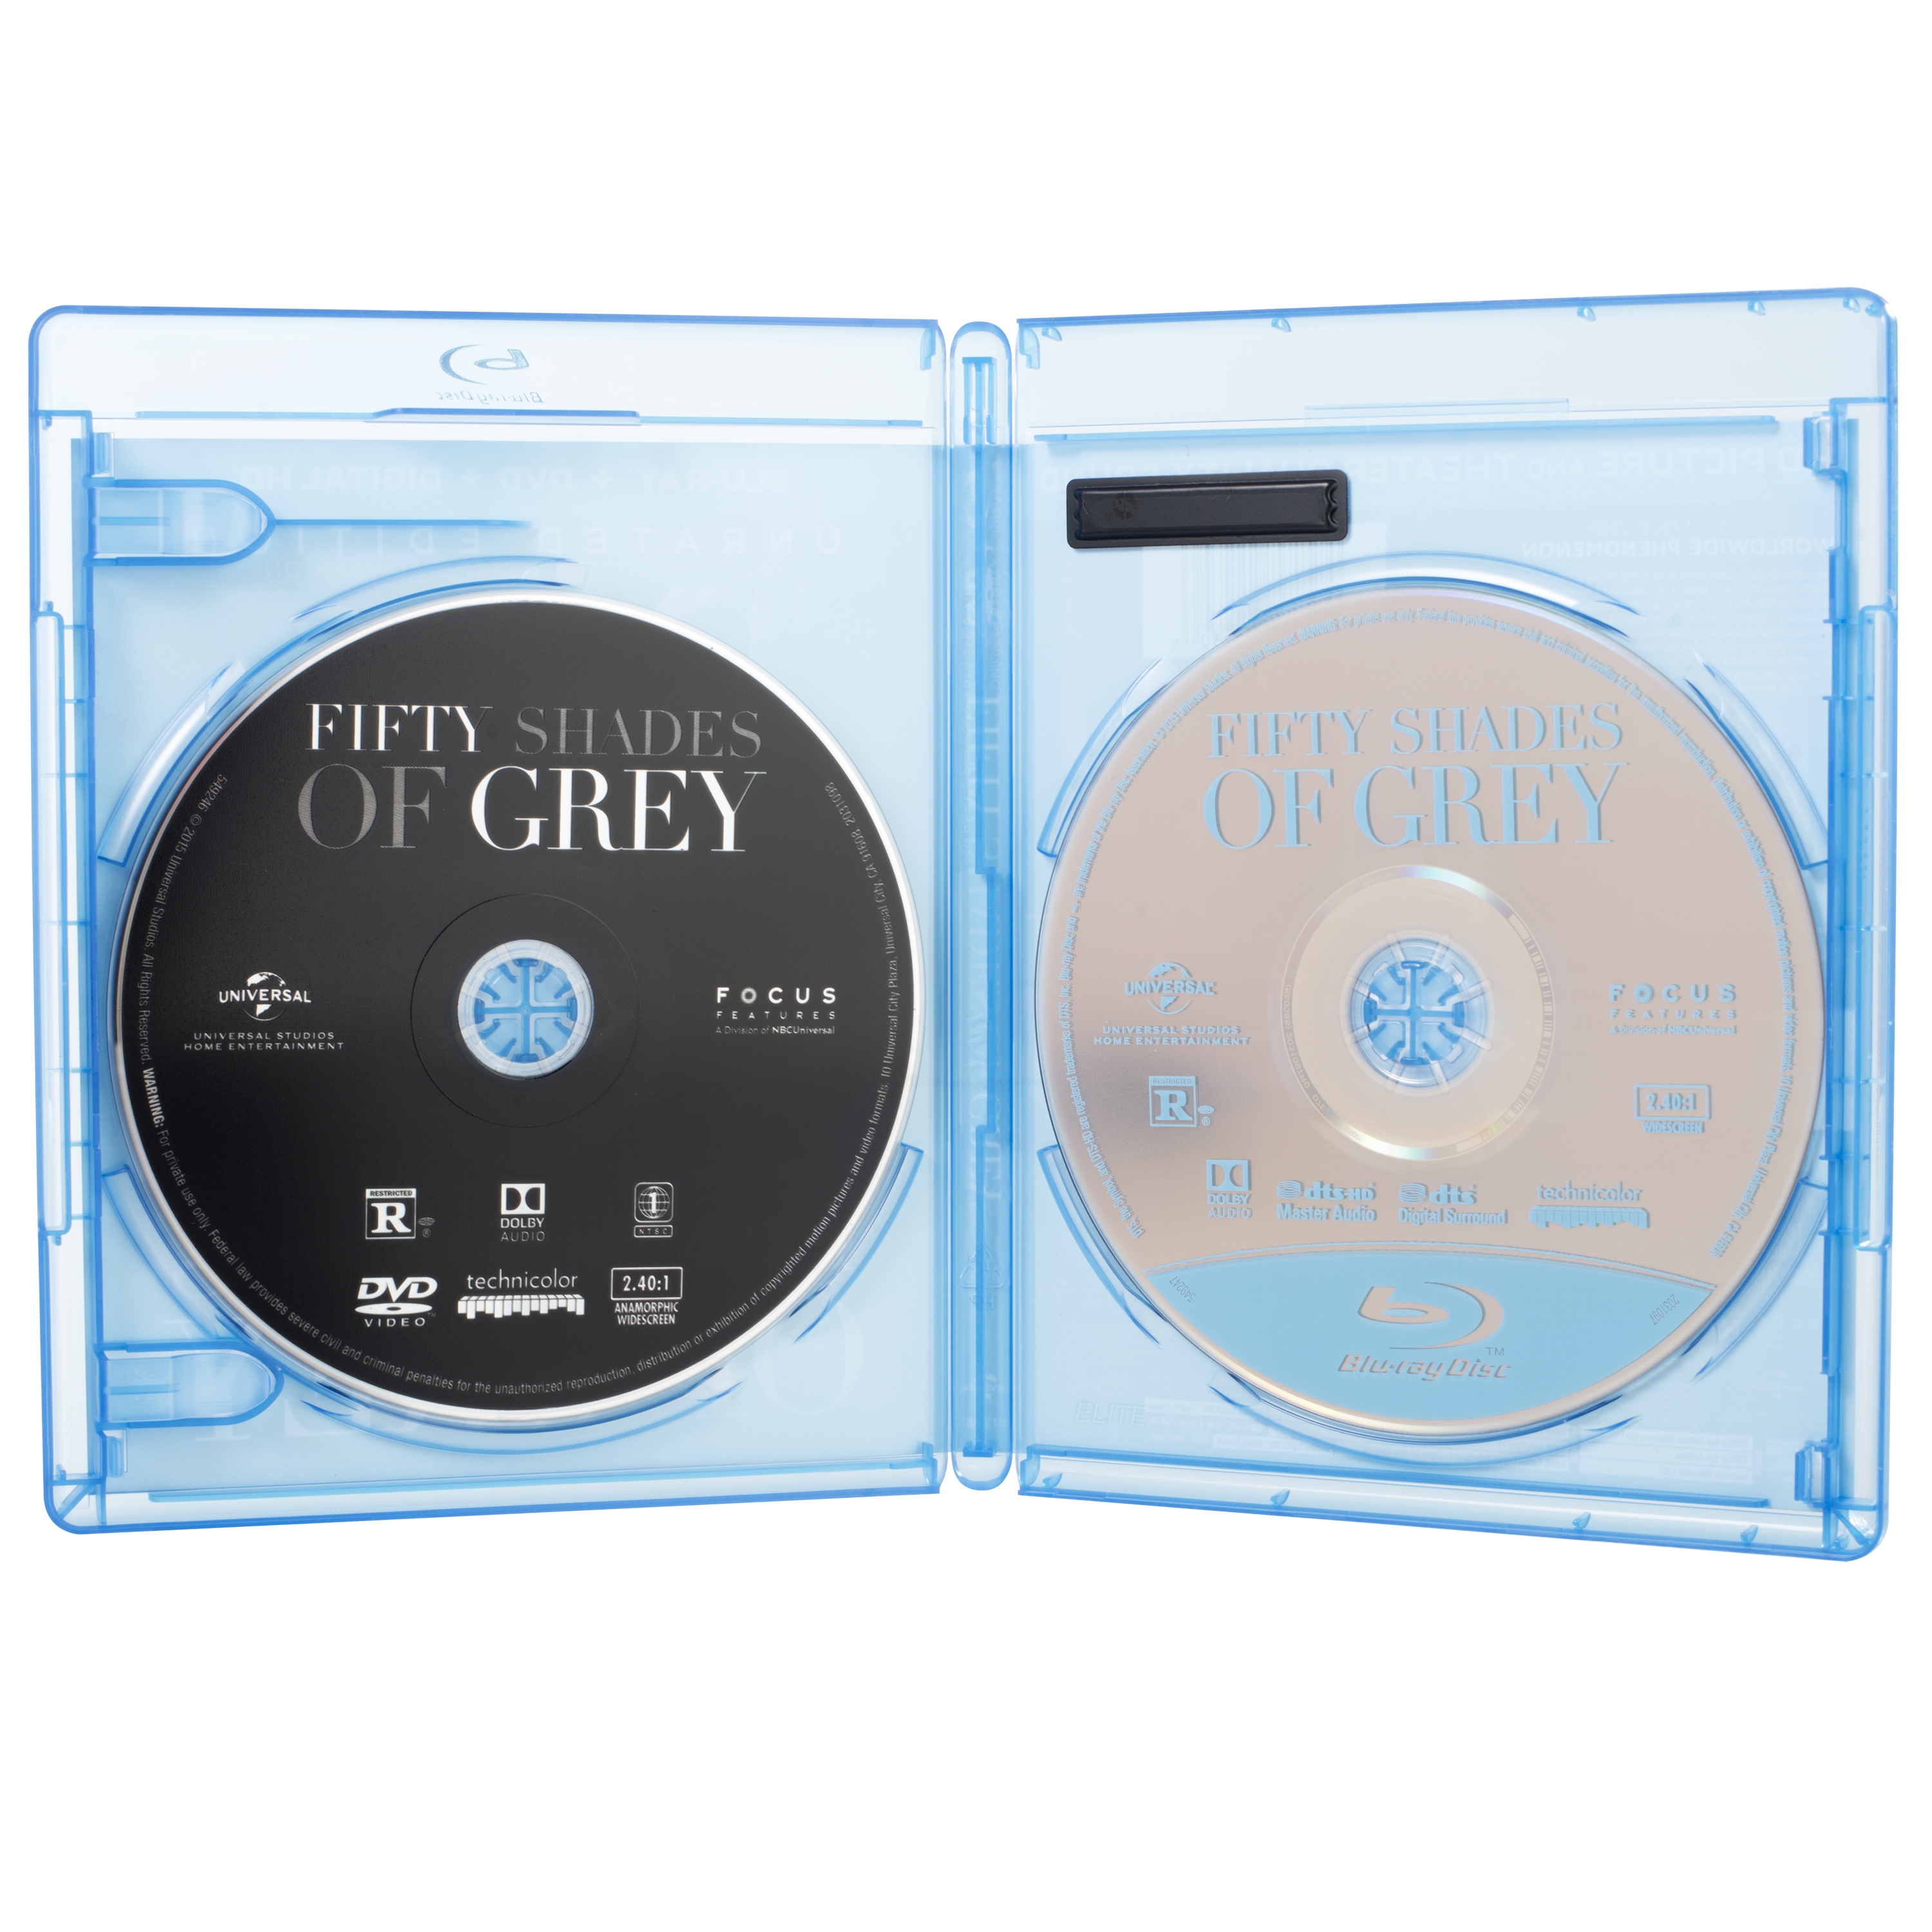 Fifty Shades of Grey (Blu-ray DVD) - image 5 of 8